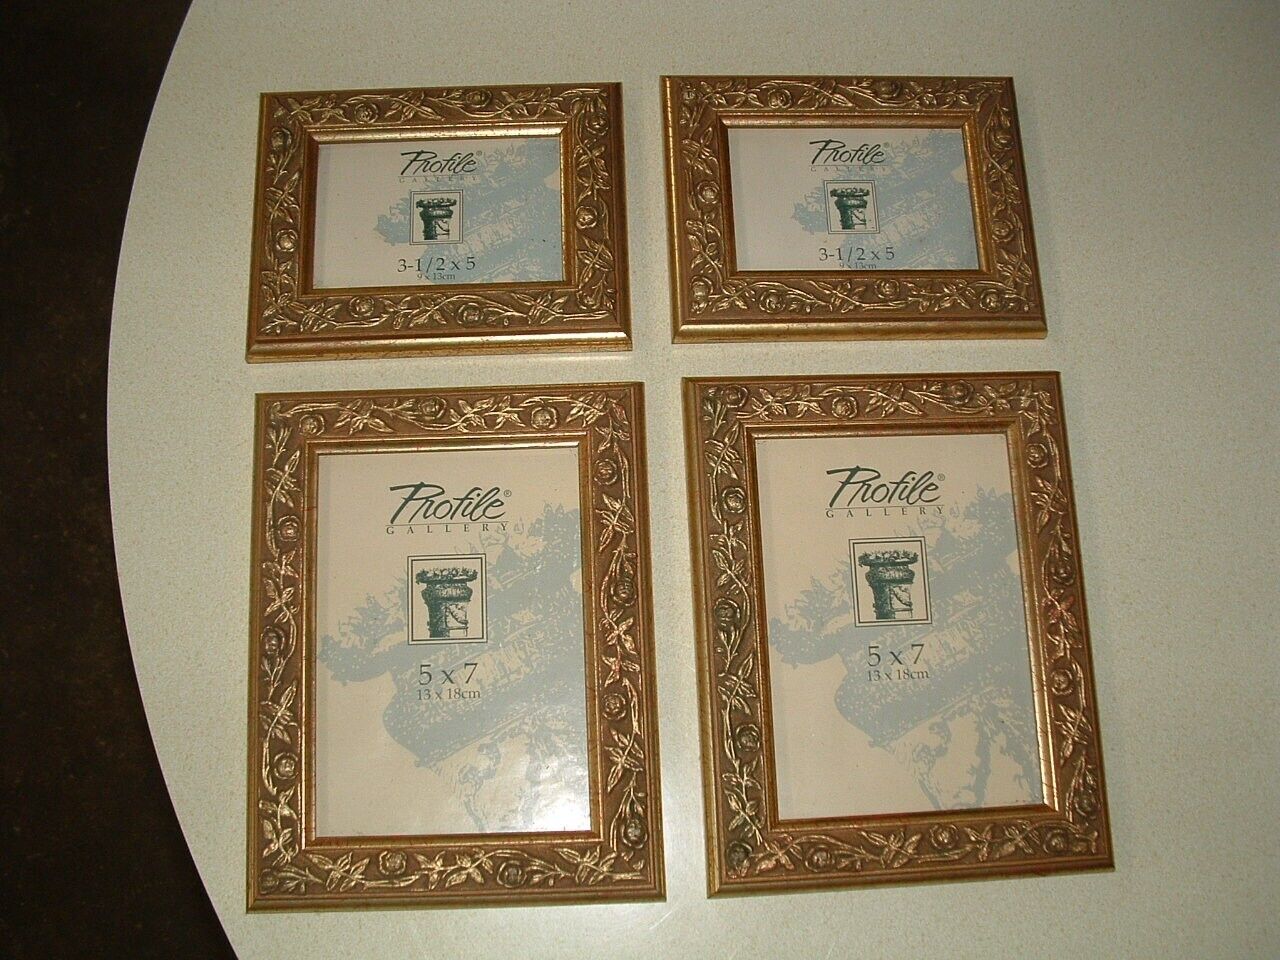 4 STUNNING GILDED GOLD COLOR ARTISTIC PICTURE FRAMES WITH GLASS INCLUDED 2 SIZES